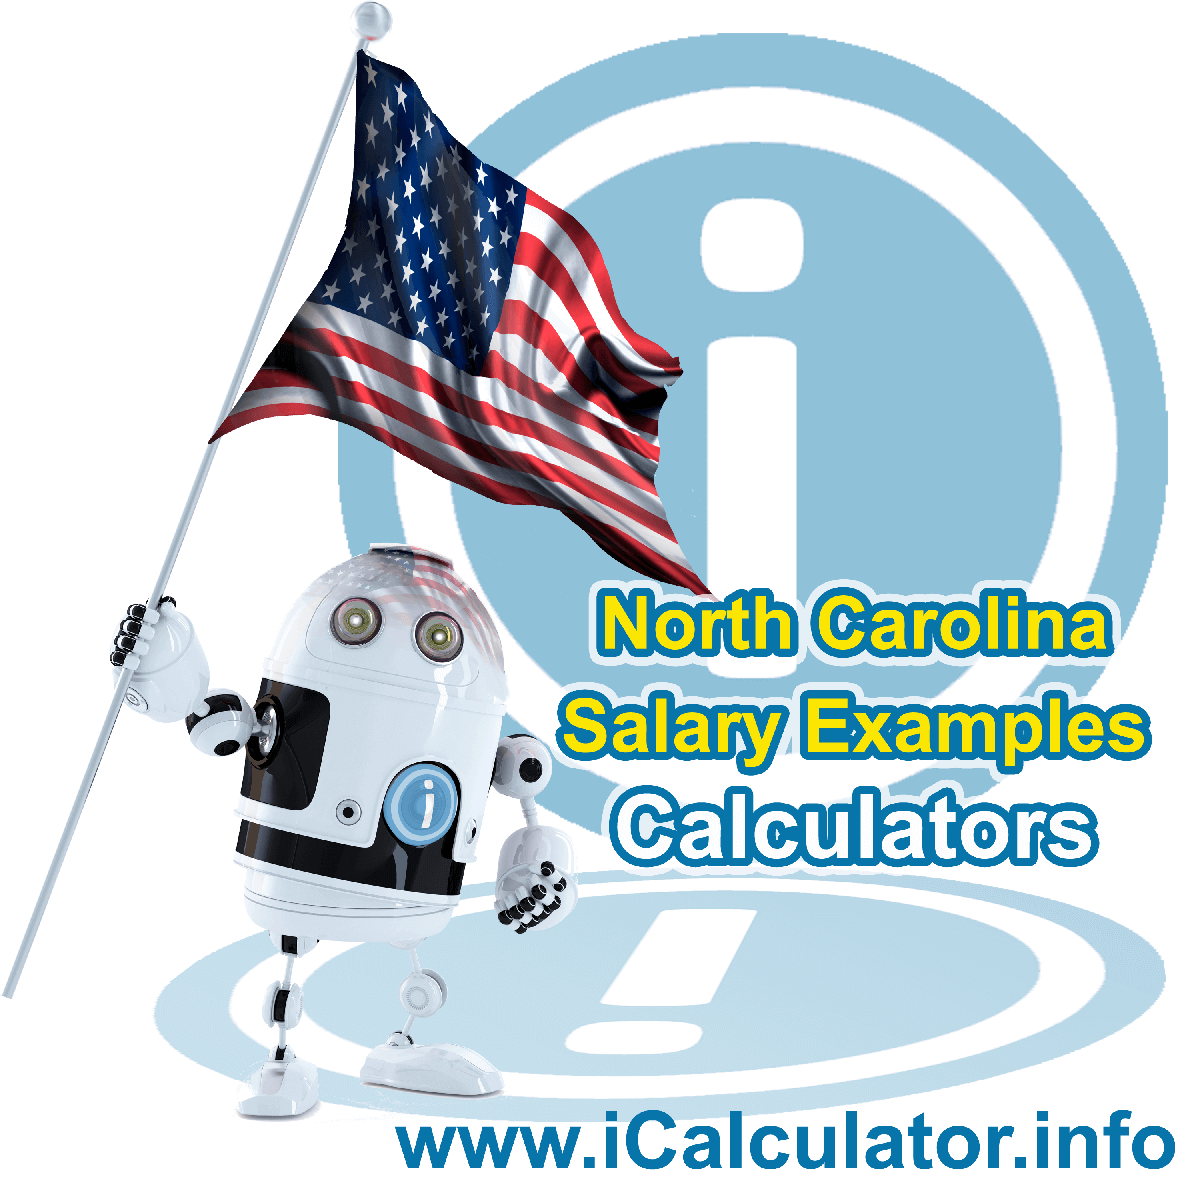 North Carolina Salary Example for $ 165,000.00 in 2023 | iCalculator™ | $ 165,000.00 salary example for employee and employer paying North Carolina State tincome taxes. Detailed salary after tax calculation including North Carolina State Tax, Federal State Tax, Medicare Deductions, Social Security, Capital Gains and other income tax and salary deductions complete with supporting North Carolina state tax tables 